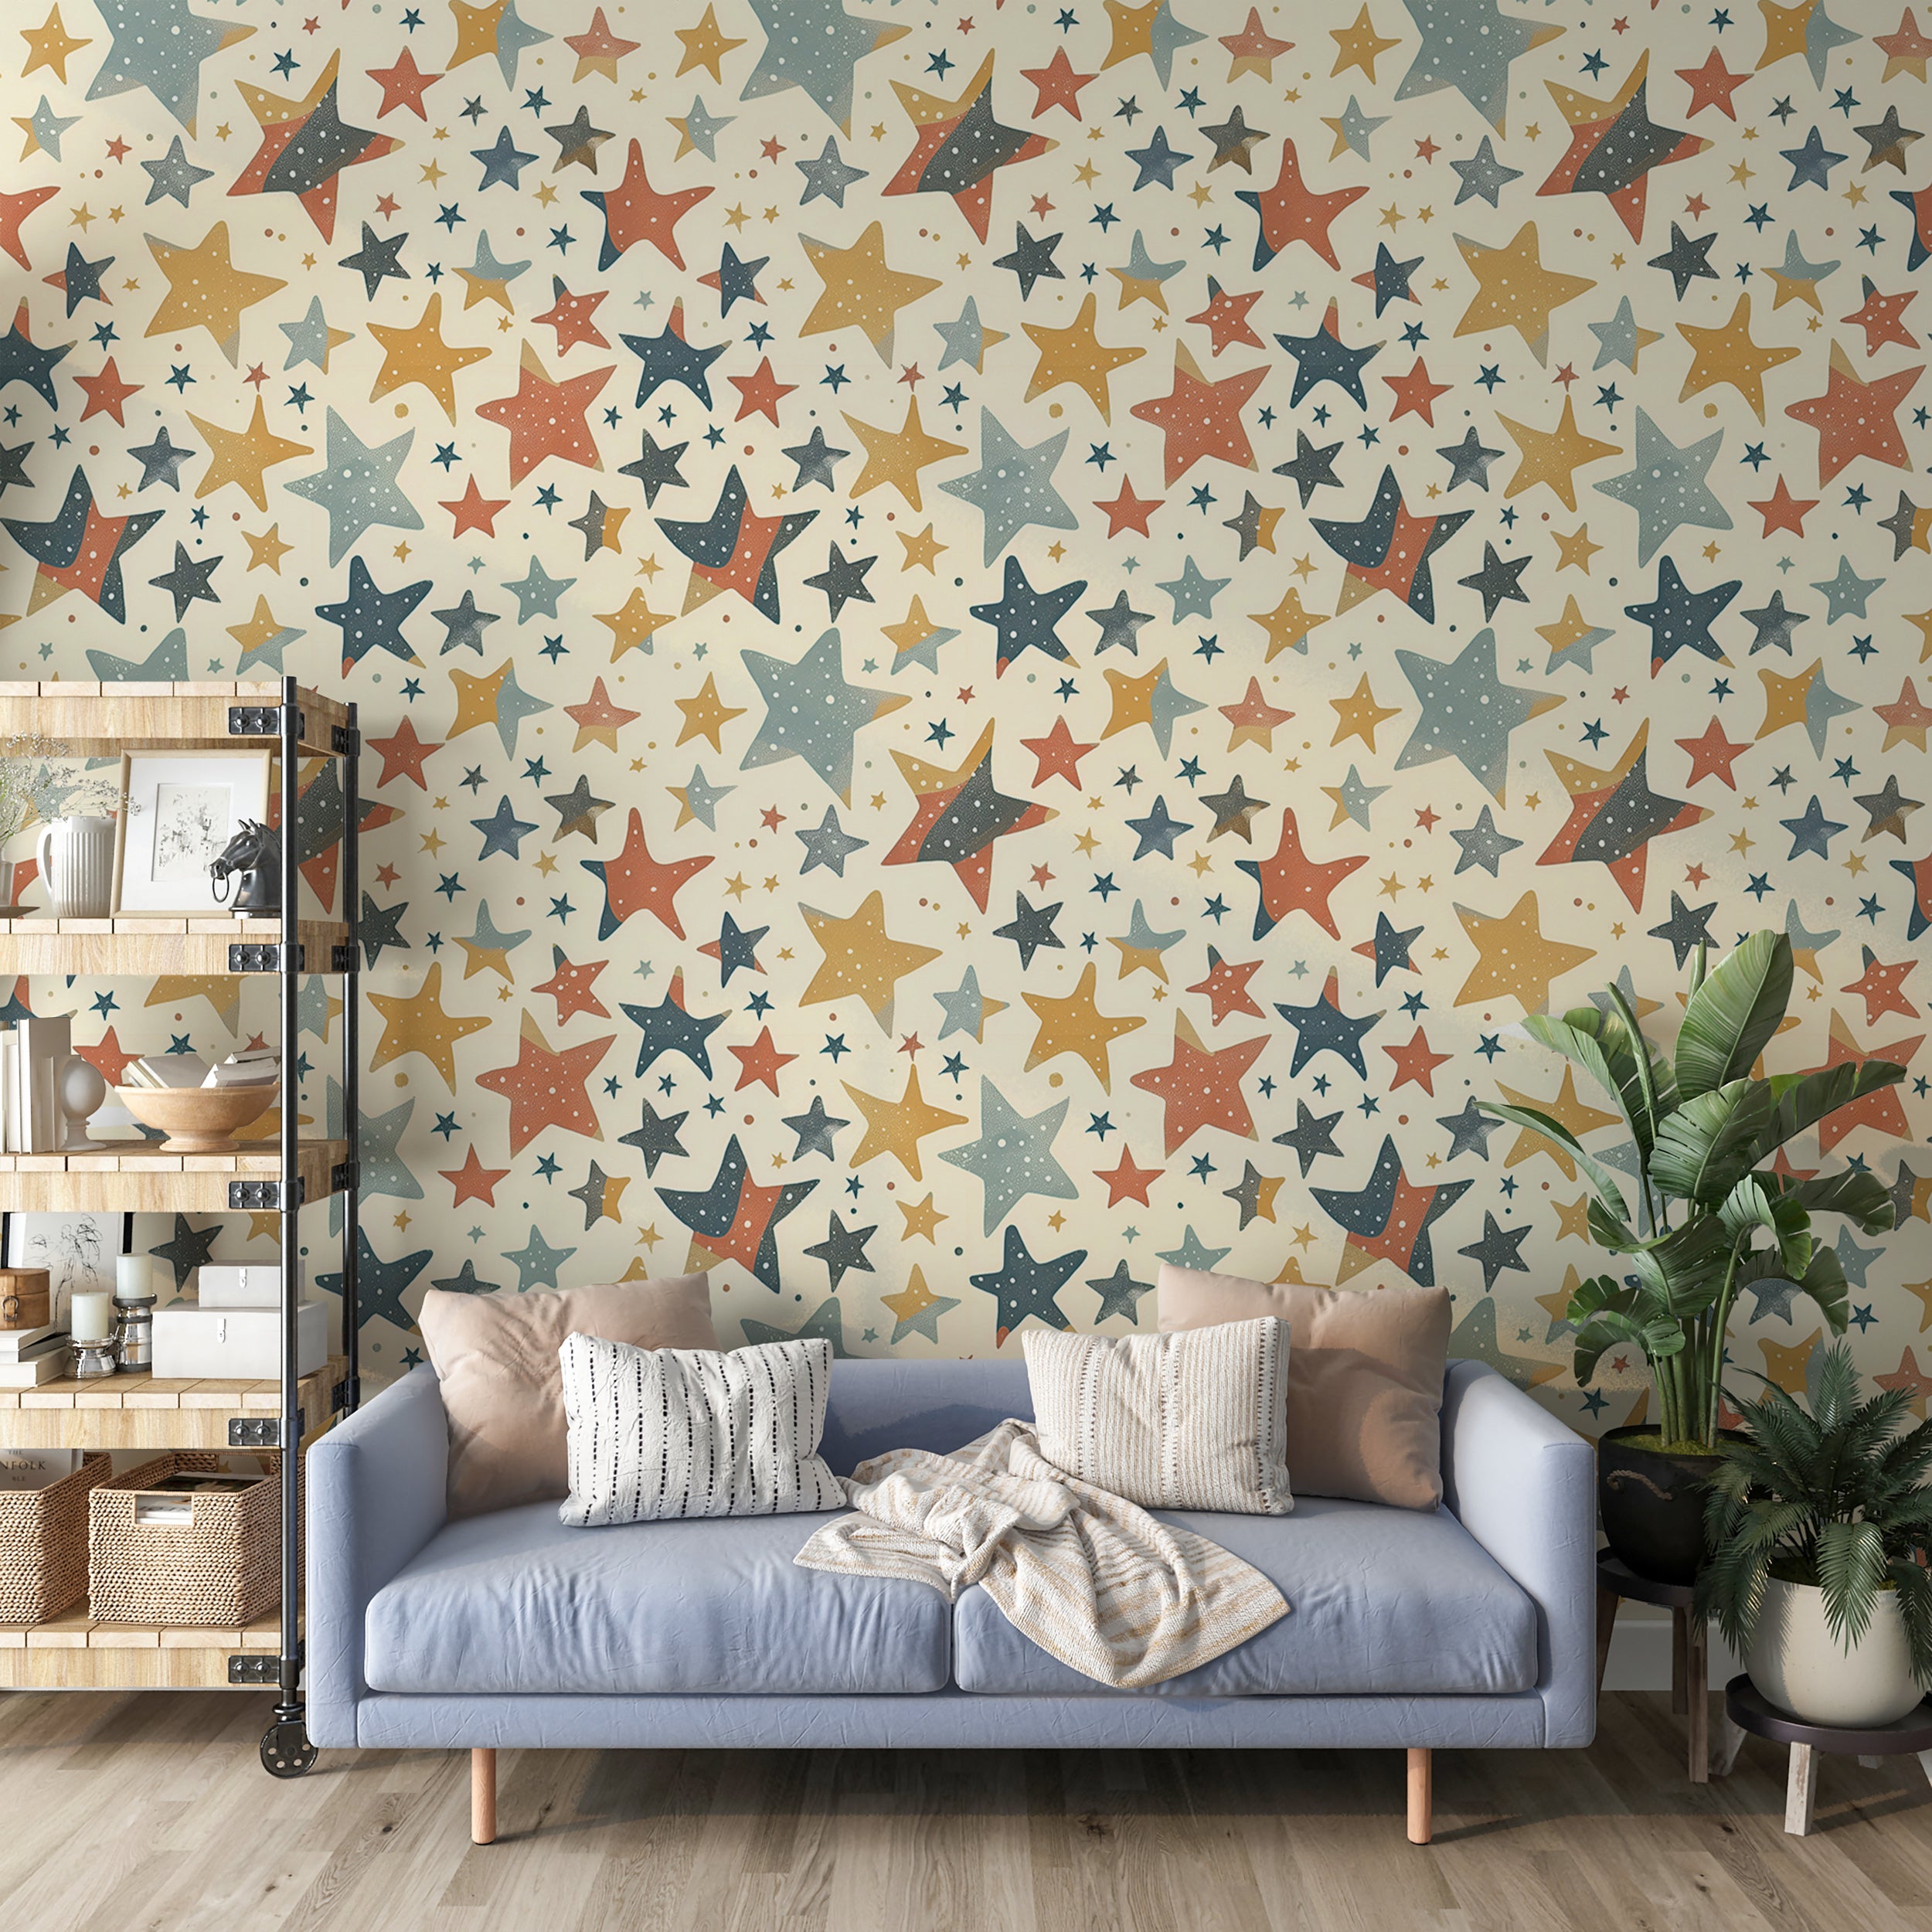 Small and Large Stars Wallpaper, Multicolor Kids Room Stars Wall Decor, Self-adhesive Starry Wallpaper, Beige Nursery Star Pattern Decal